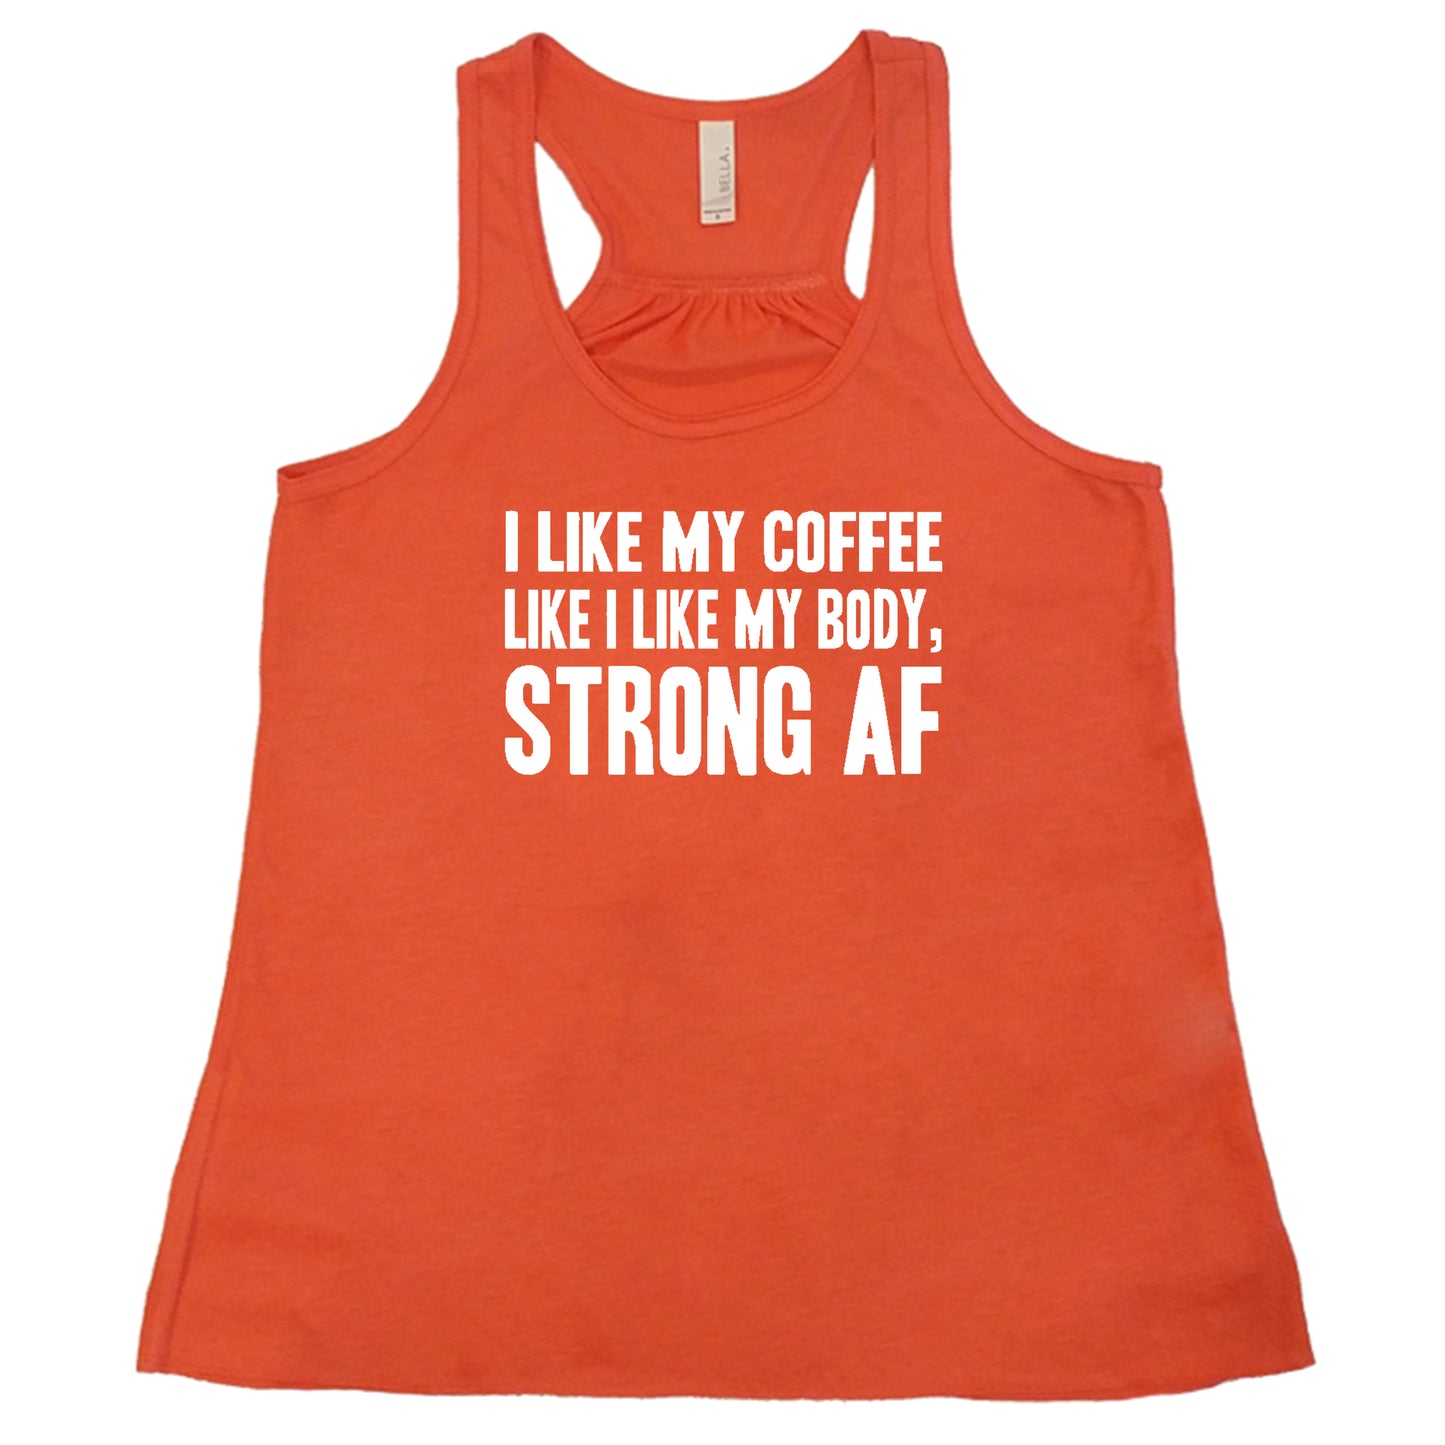 "I Like My Coffee Like I Like My Body Strong AF" quote in white lettering on orange racerback shirt